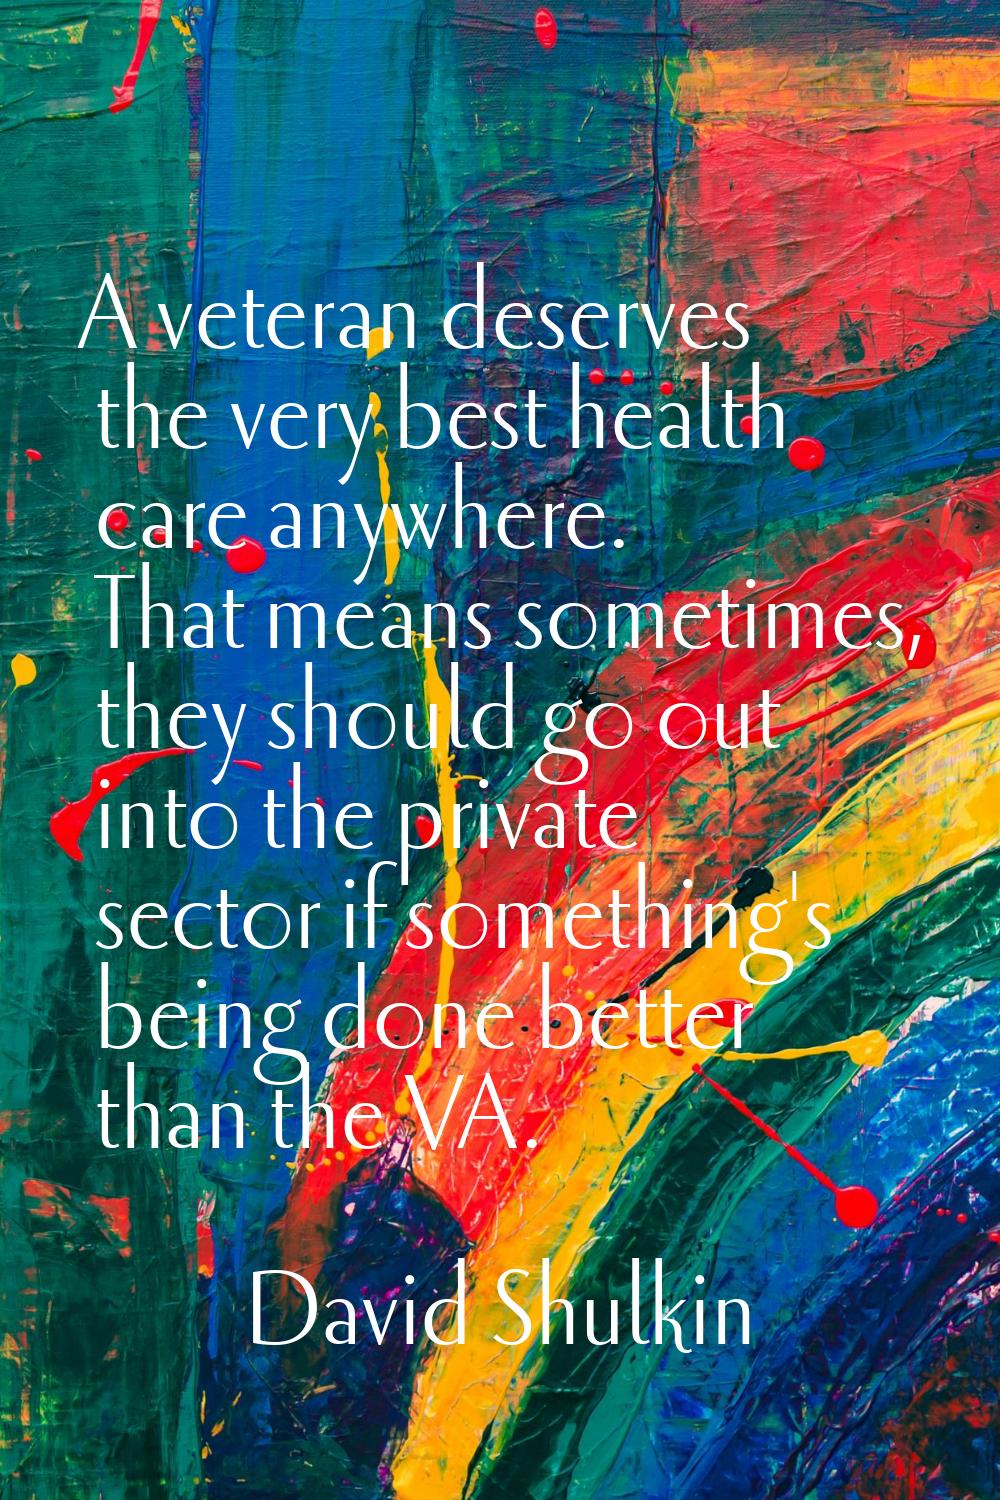 A veteran deserves the very best health care anywhere. That means sometimes, they should go out int